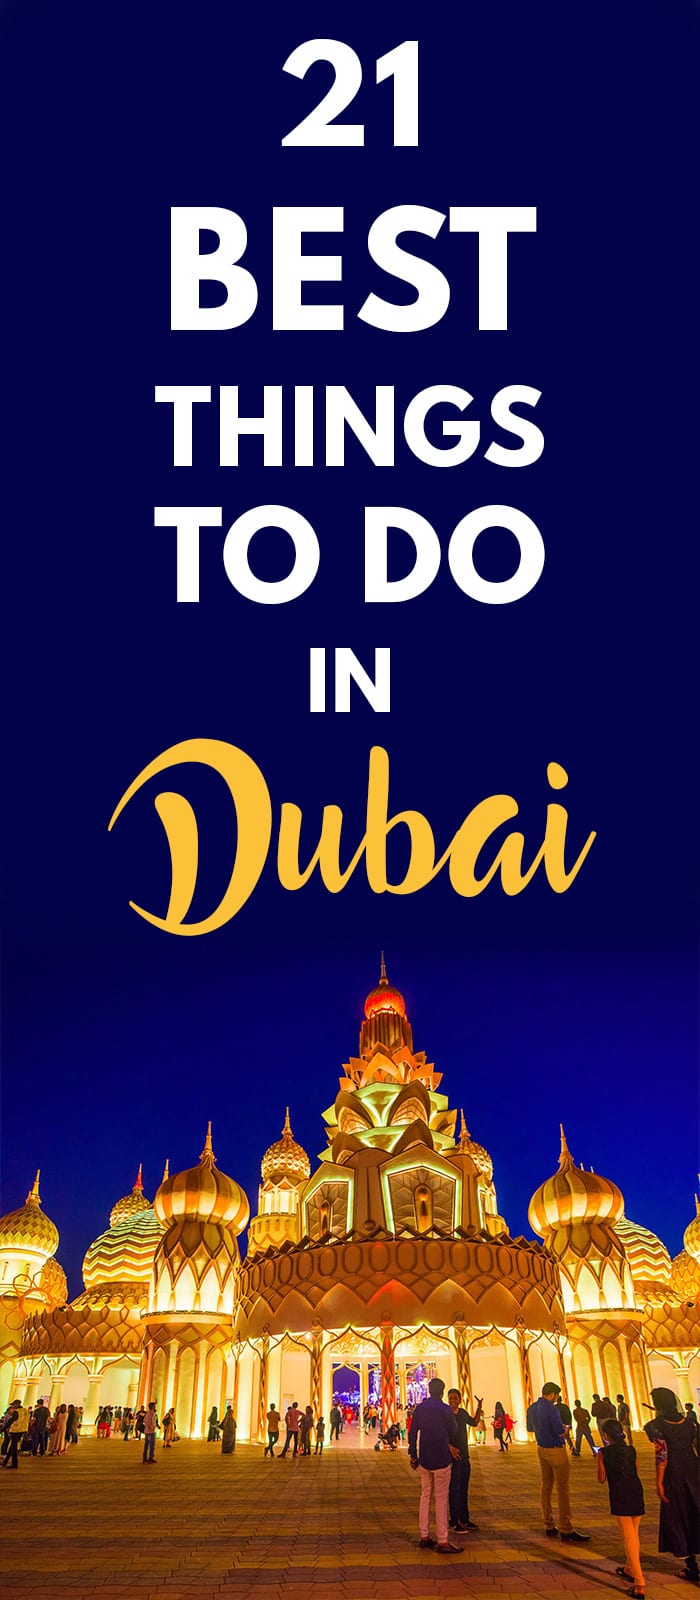 21 Best Things to do in Dubai